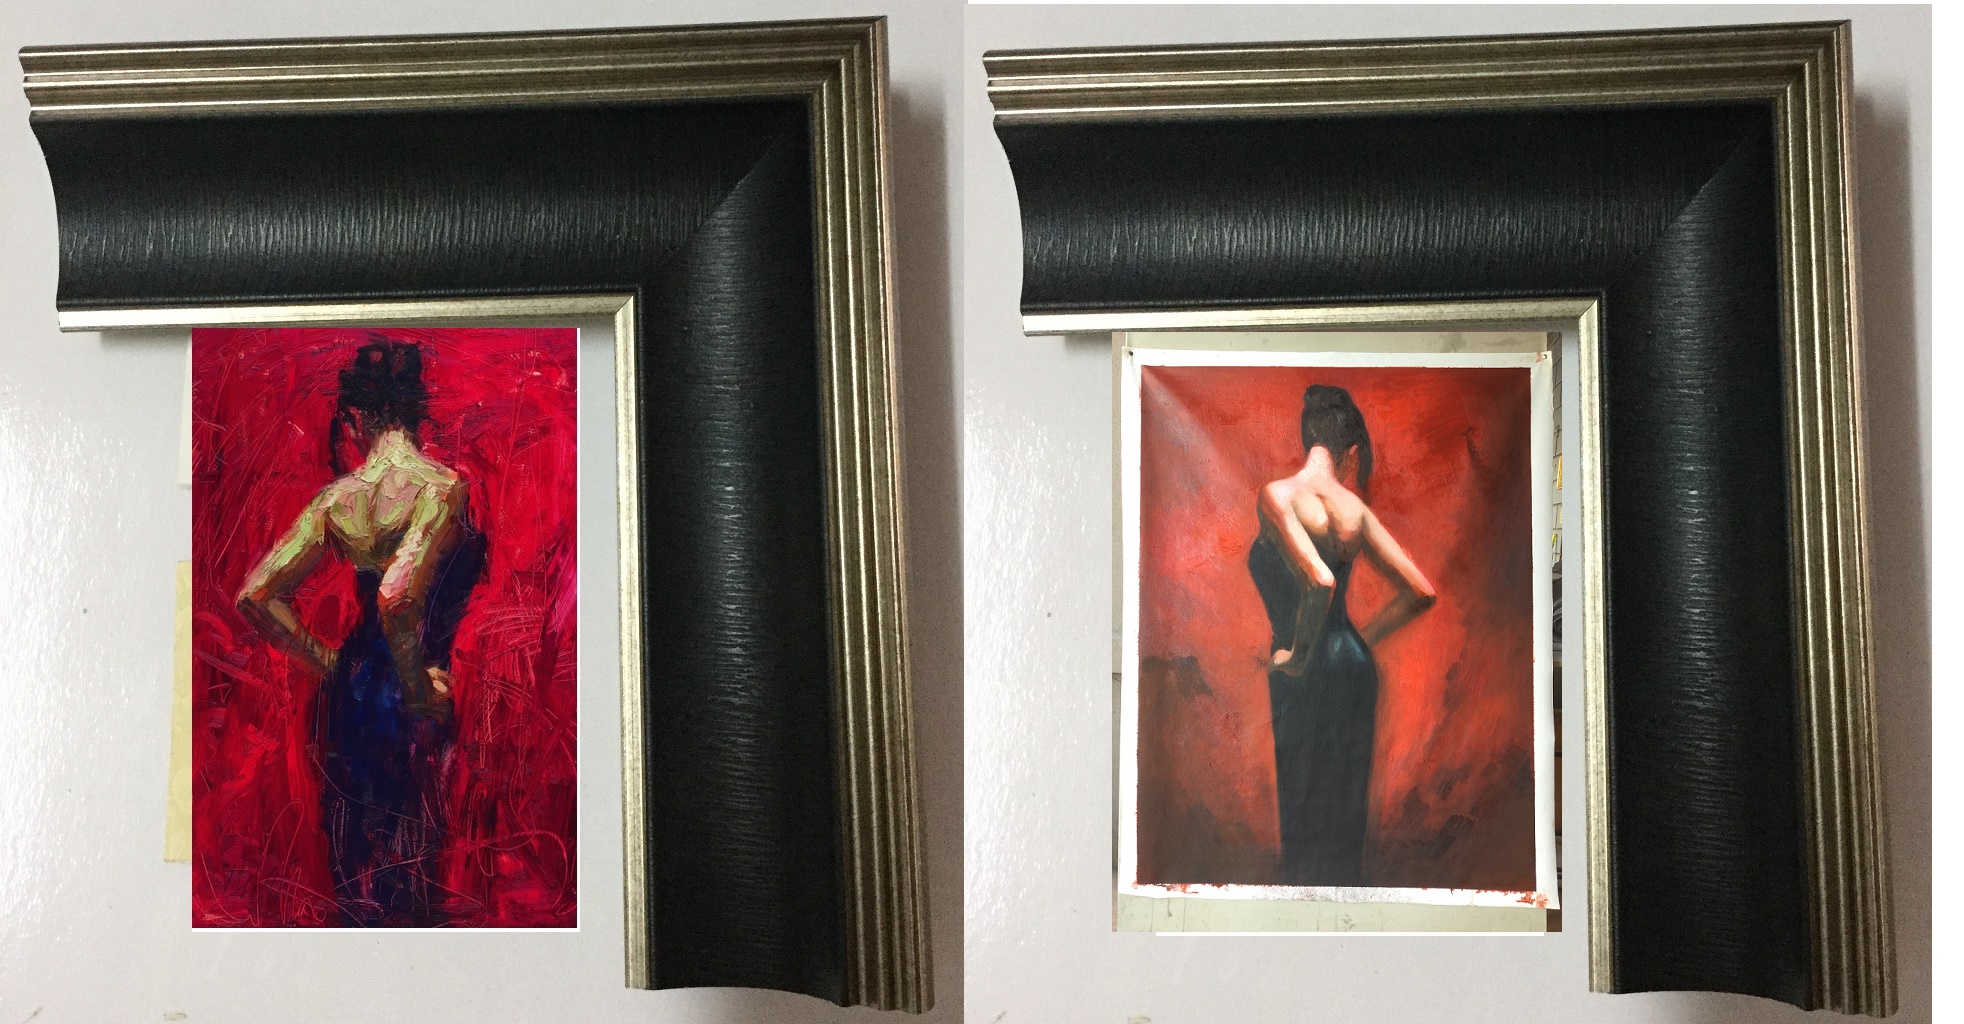 A pair of 16x24" framed Reproductions Henry Asencio's elegance